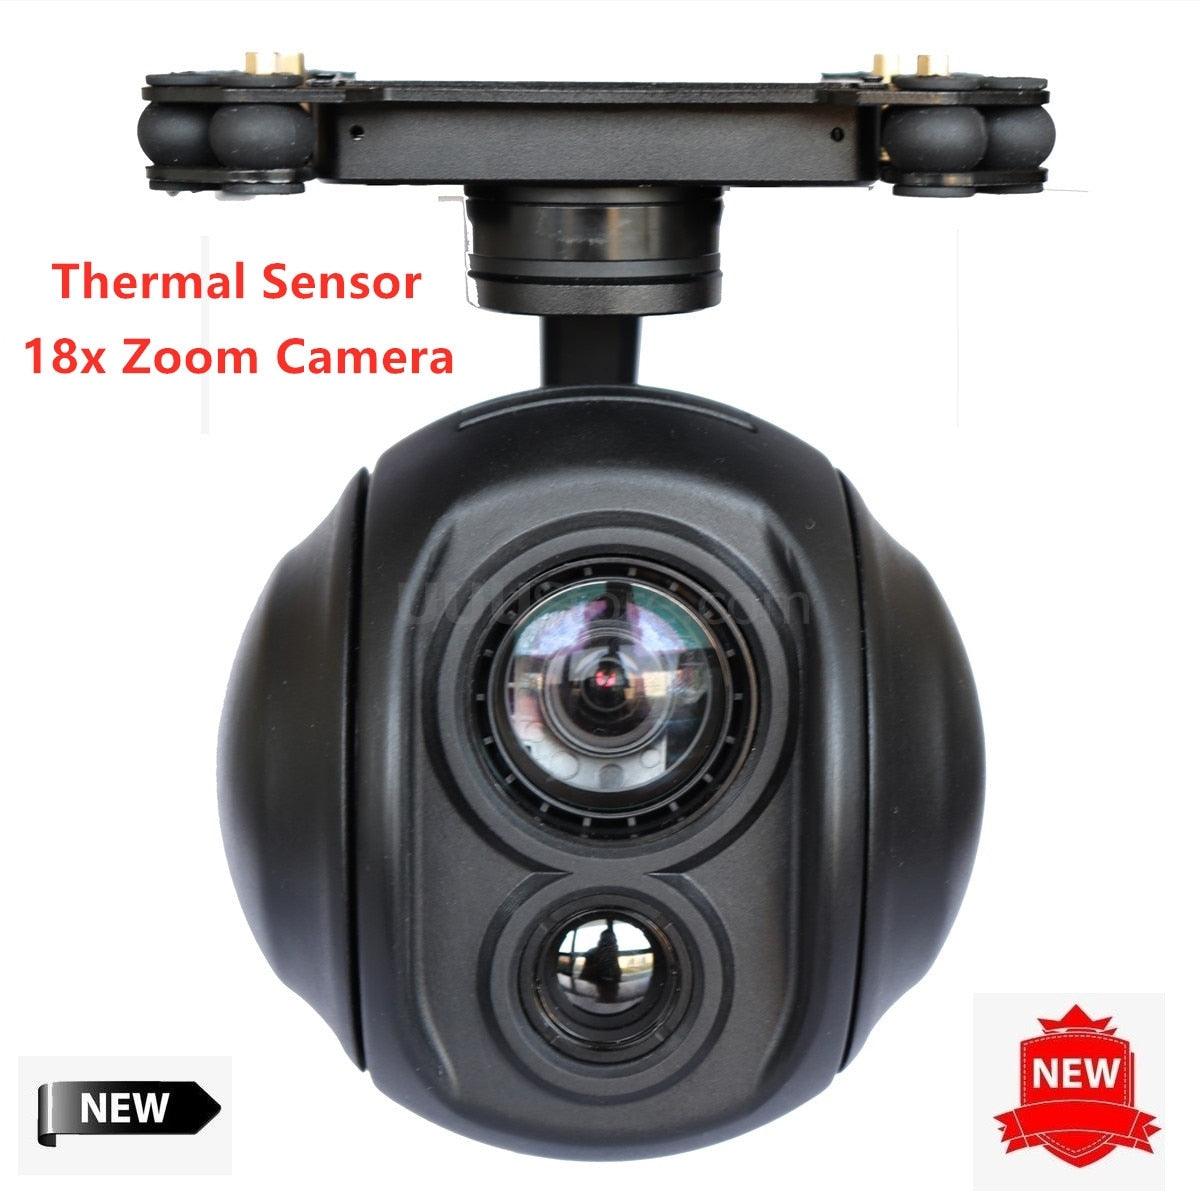 18x Zoom UAV Thermal Camera Gimbal Stabilizer Daylight Sensor for FPV Drone Aerial Cinematography Inspection Rescue Surveillance - RCDrone